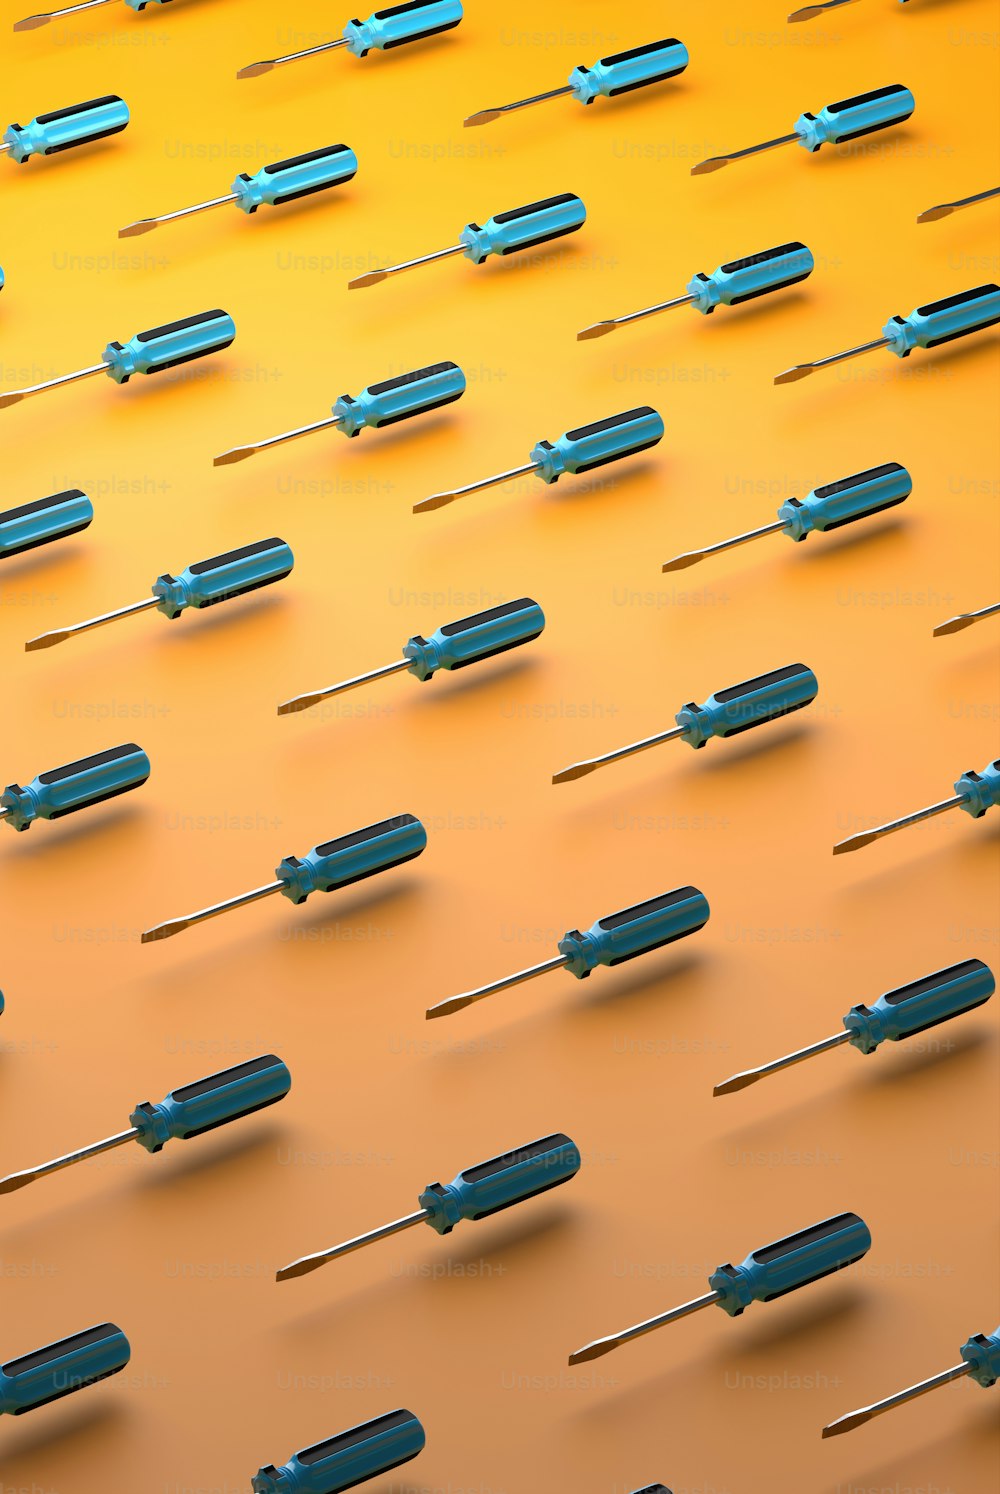 a group of electronic components on a yellow and orange background